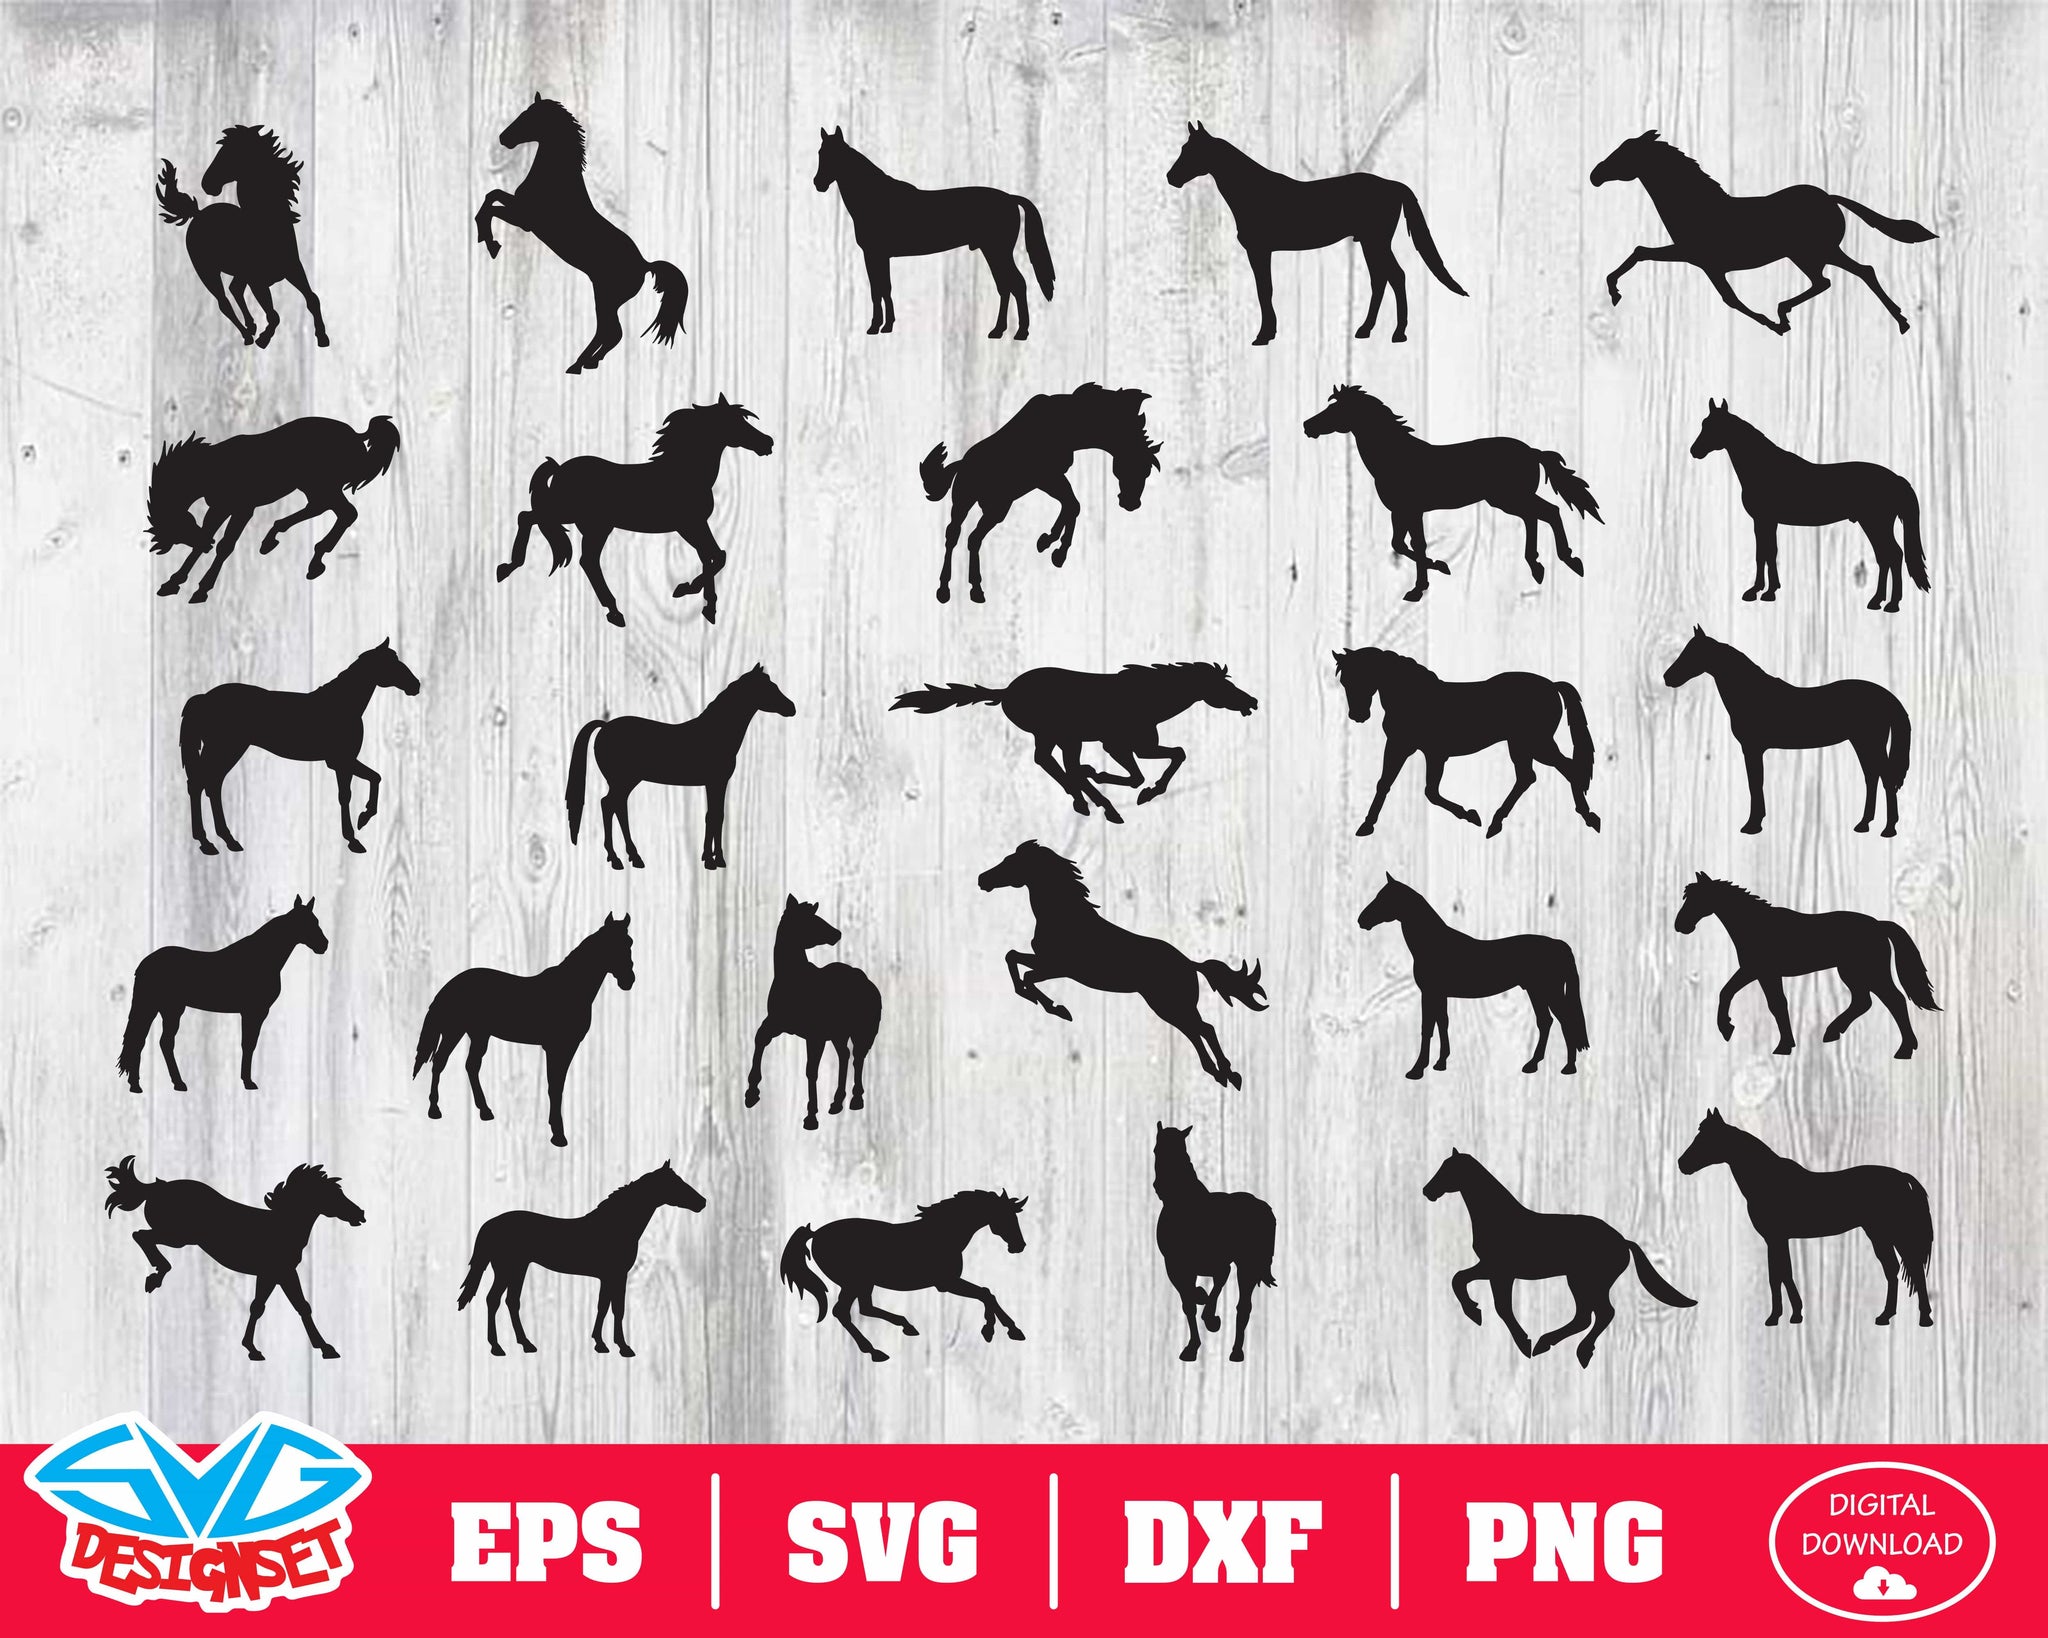 Horse Svg, Dxf, Eps, Png, Clipart, Silhouette and Cutfile - SVGDesignSets